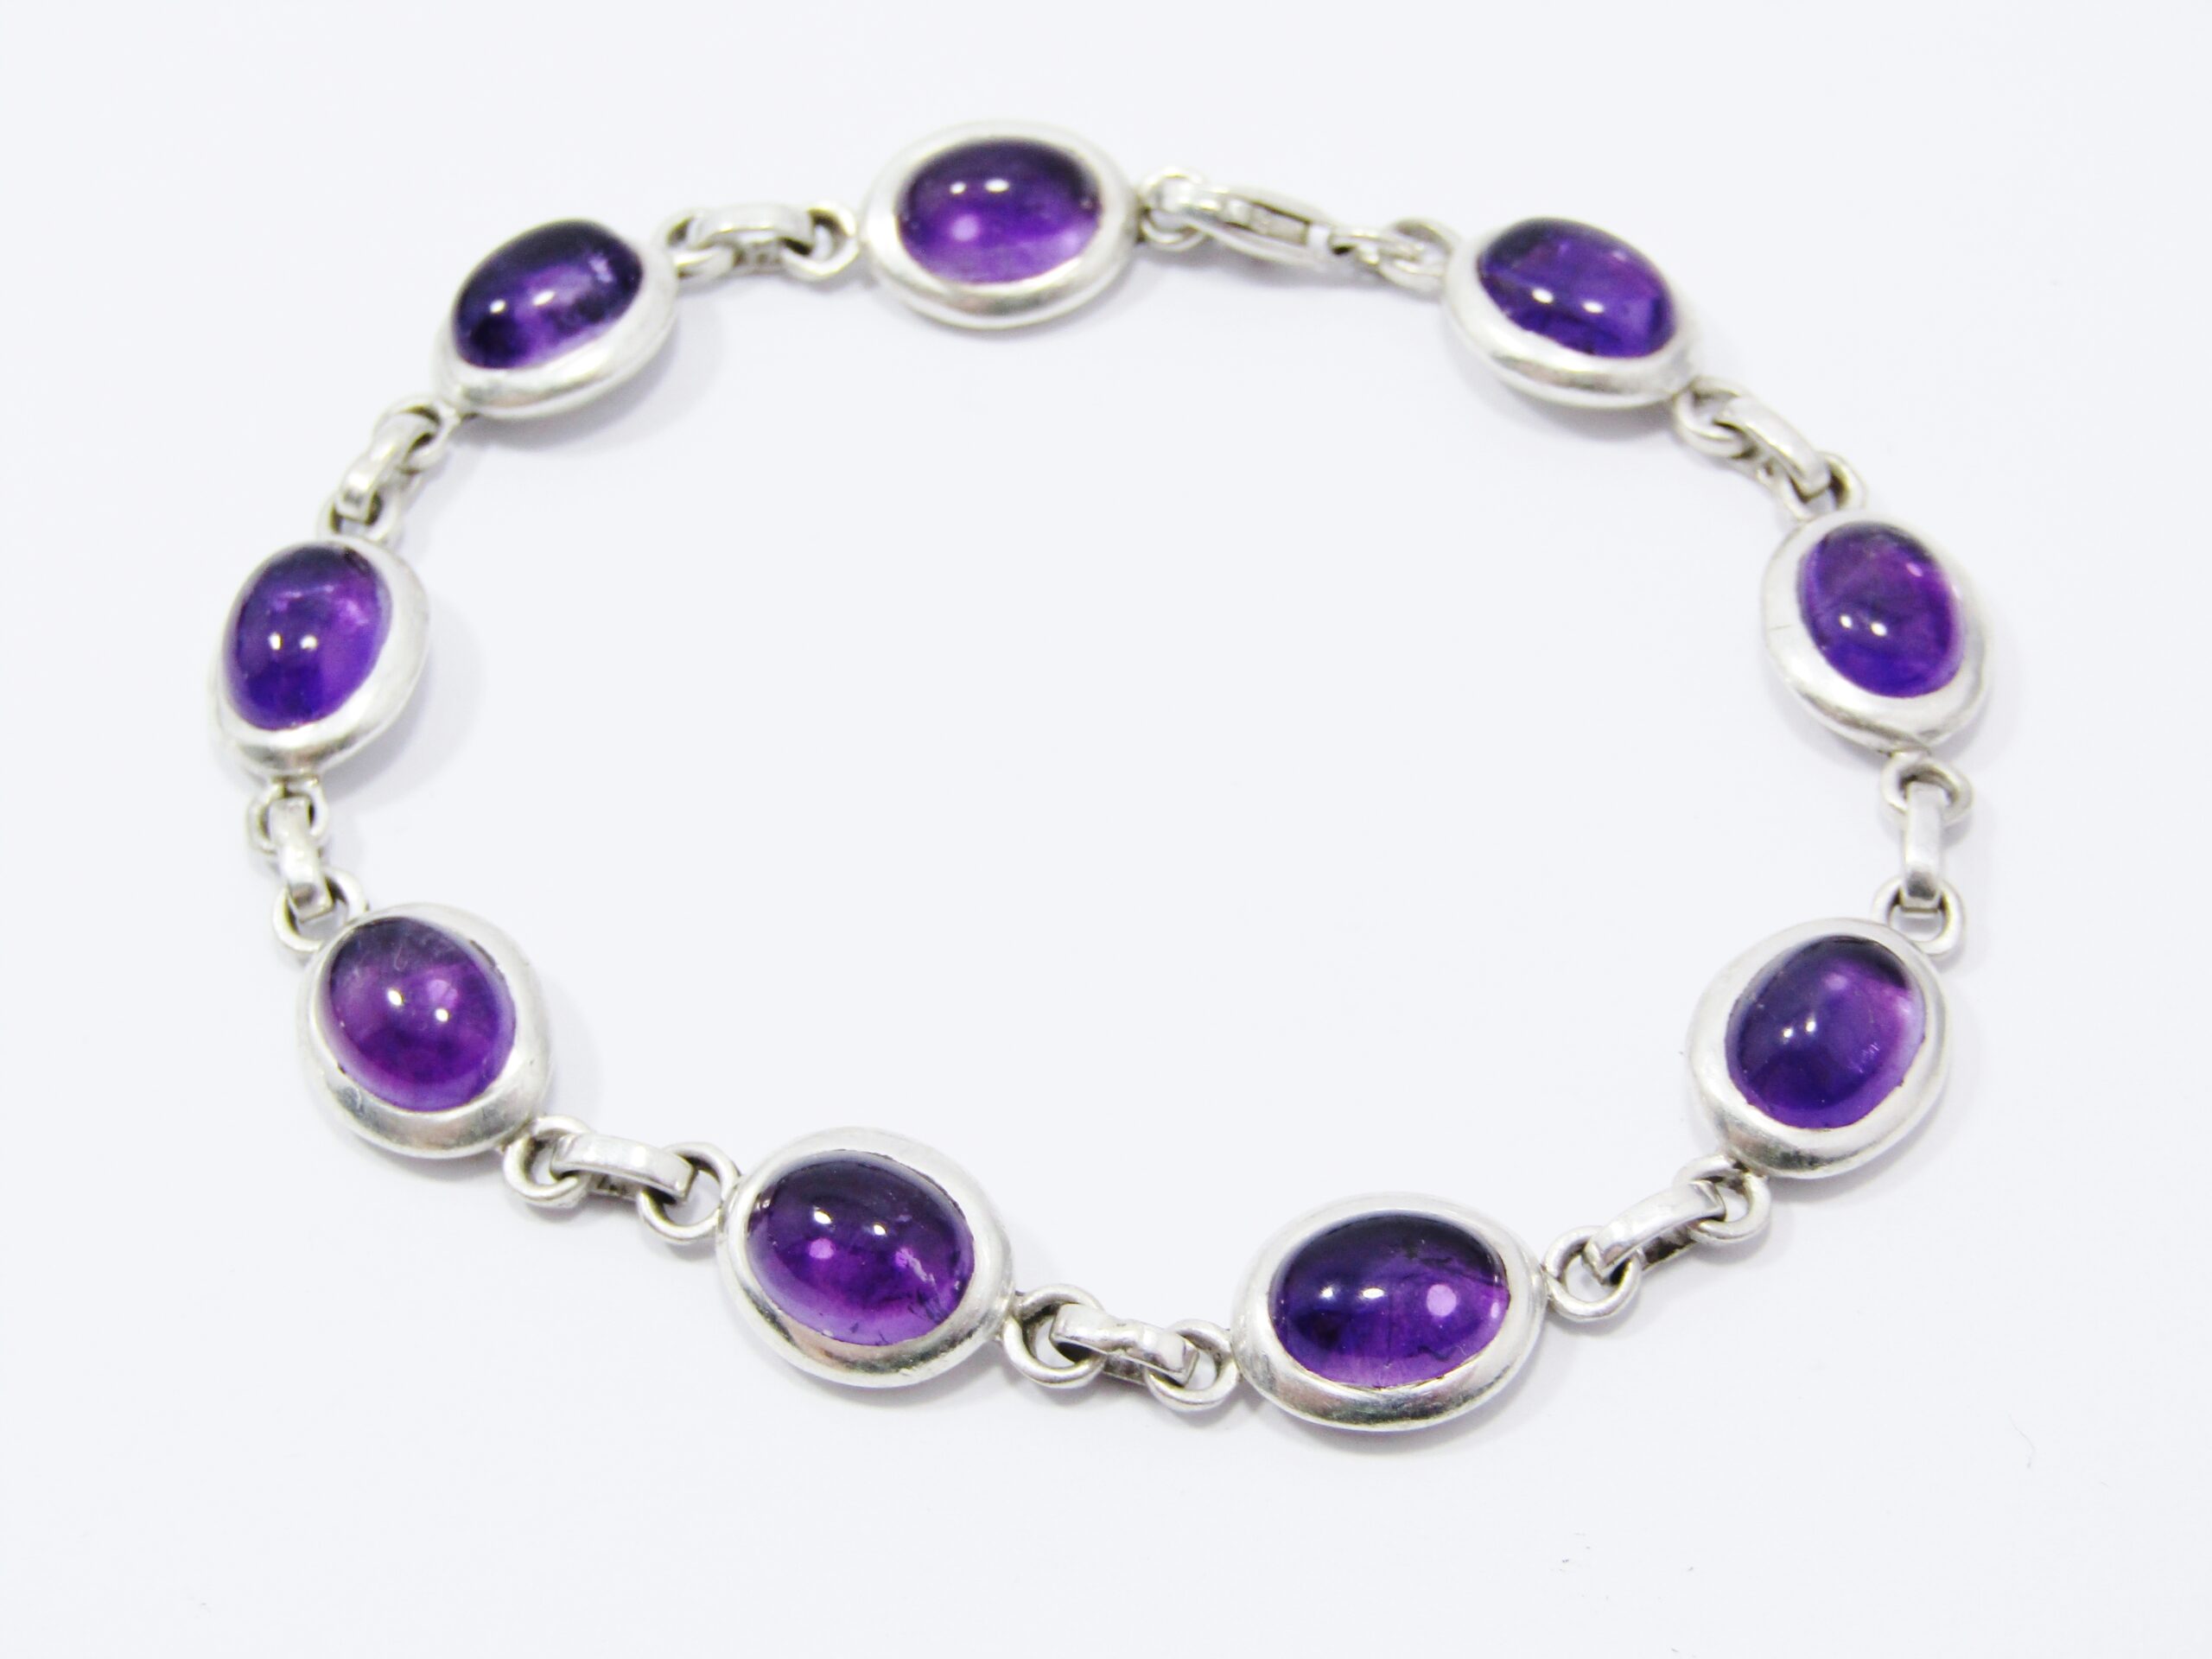 A Gorgeous Cabochon Amethyst Bracelet in Sterling Silver